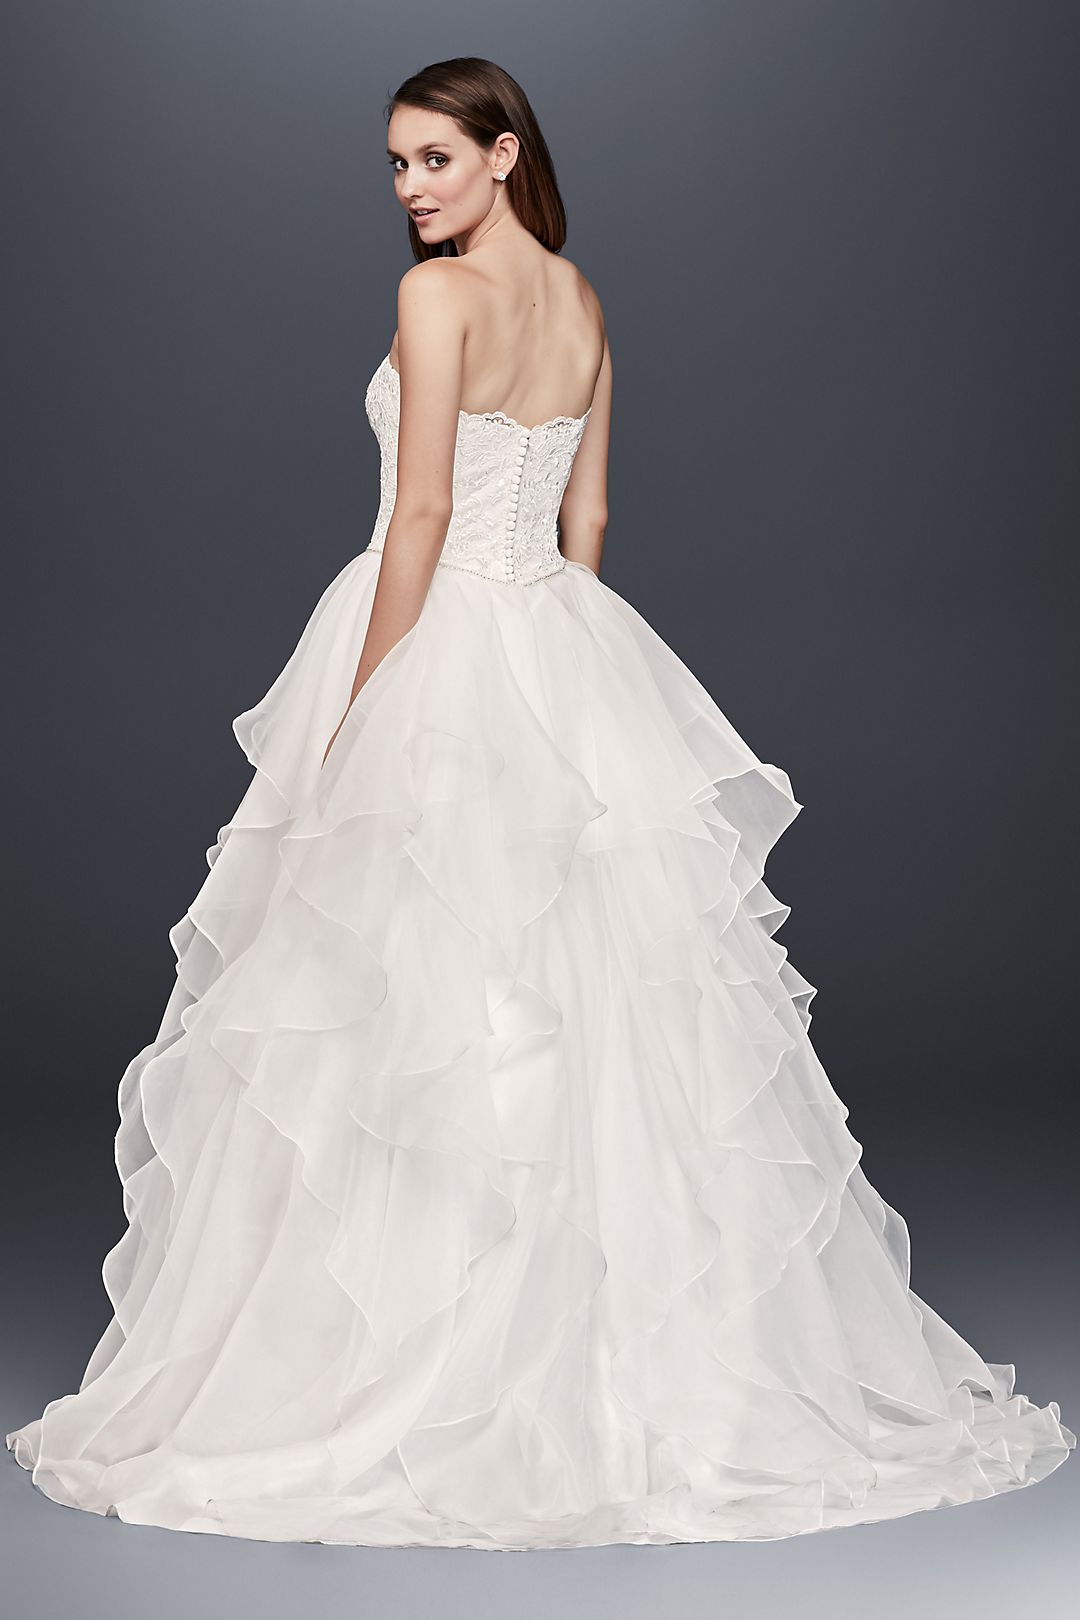 As-Is Lace and Organza Petite Wedding Ball Gown Image 2